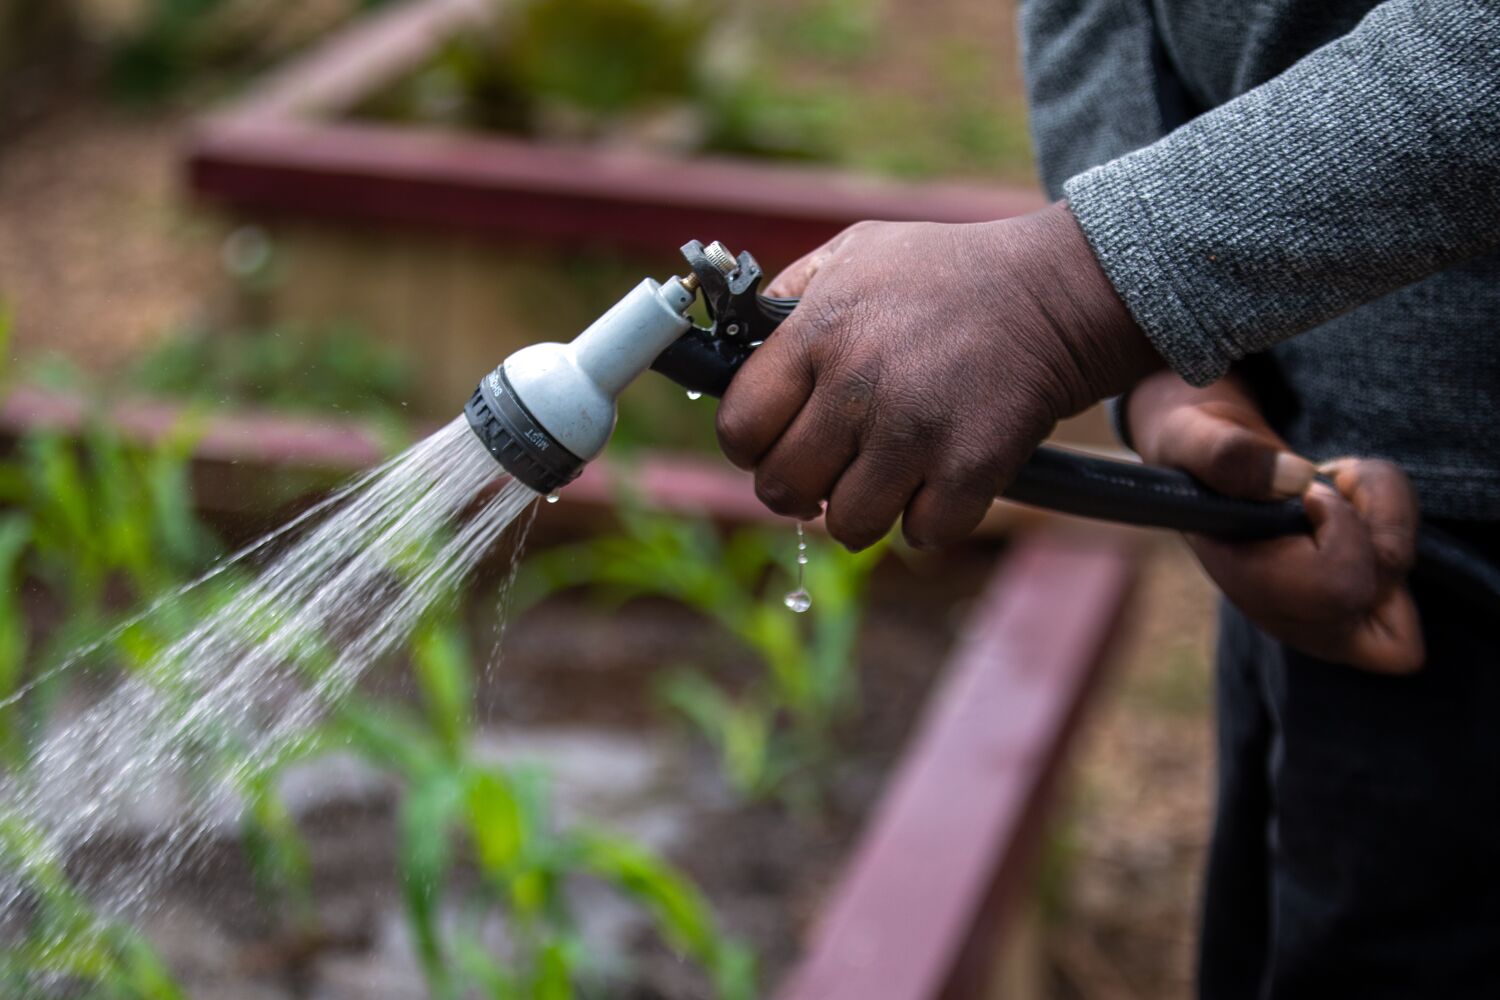 Californians were asked to cut water use 15% during the drought. How close did they get?